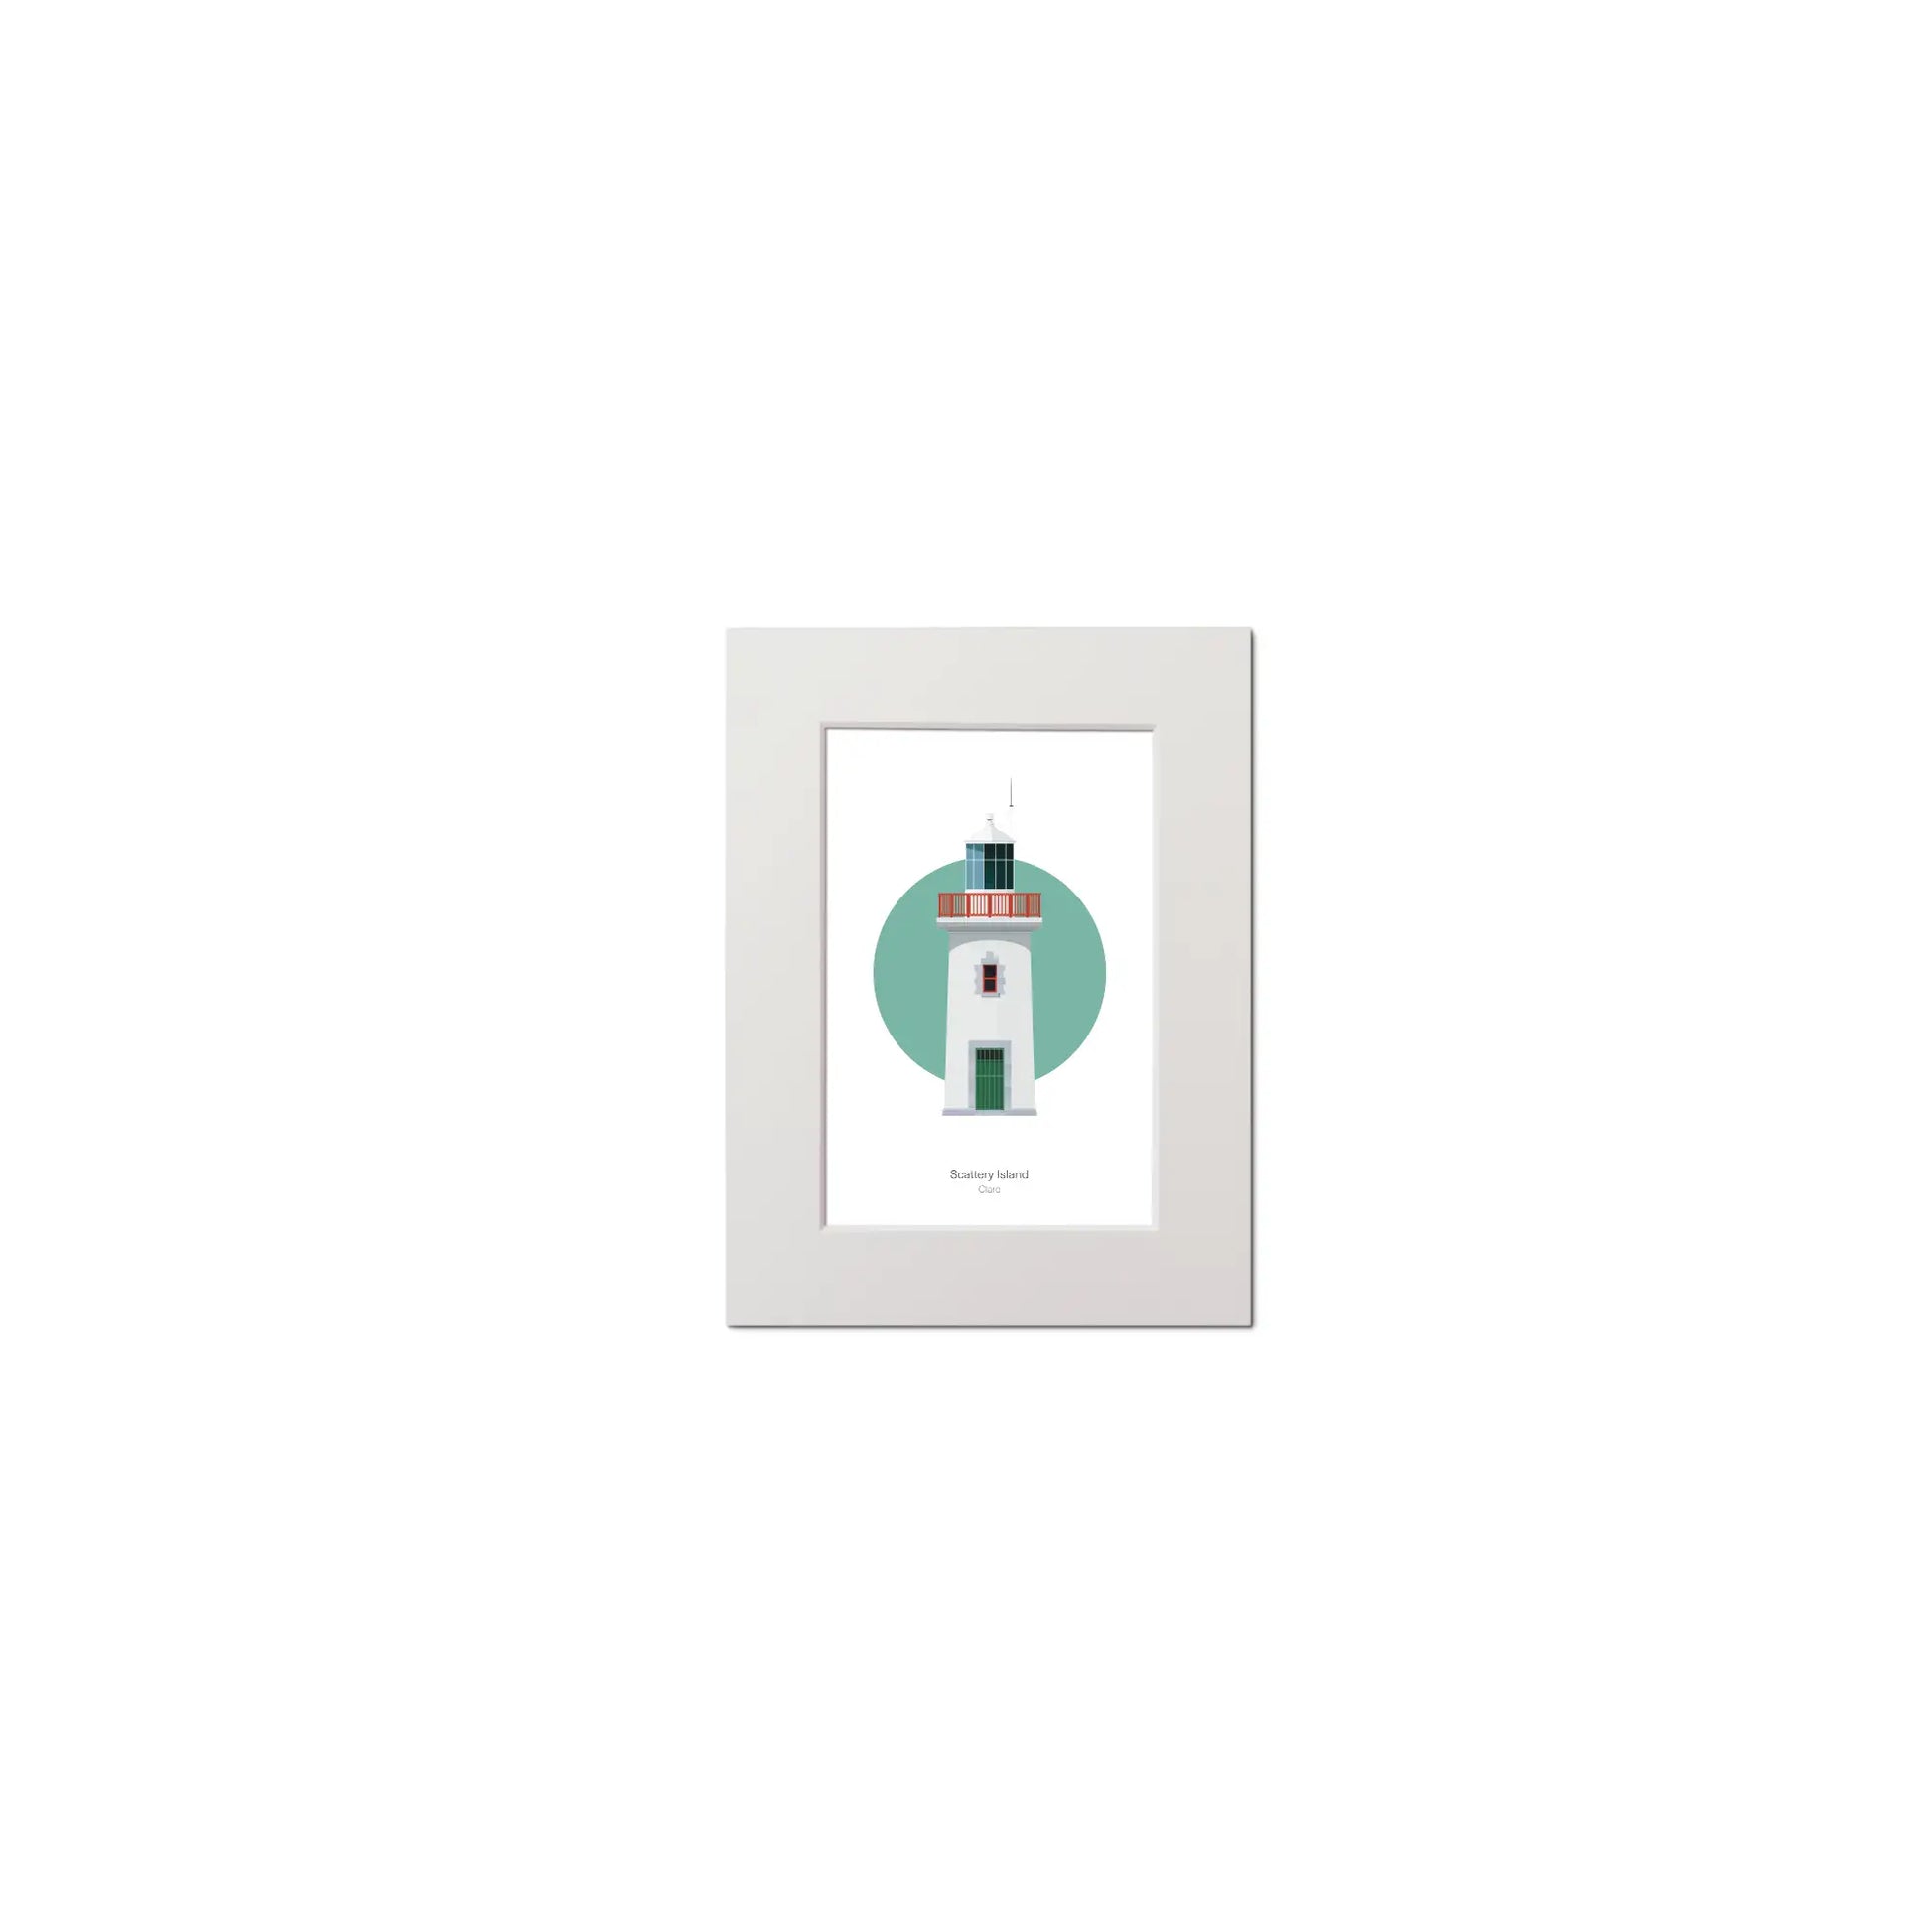 Contemporary graphic illustration of Scattery Island lighthouse on a white background inside light blue square, mounted and measuring 15x20cm.